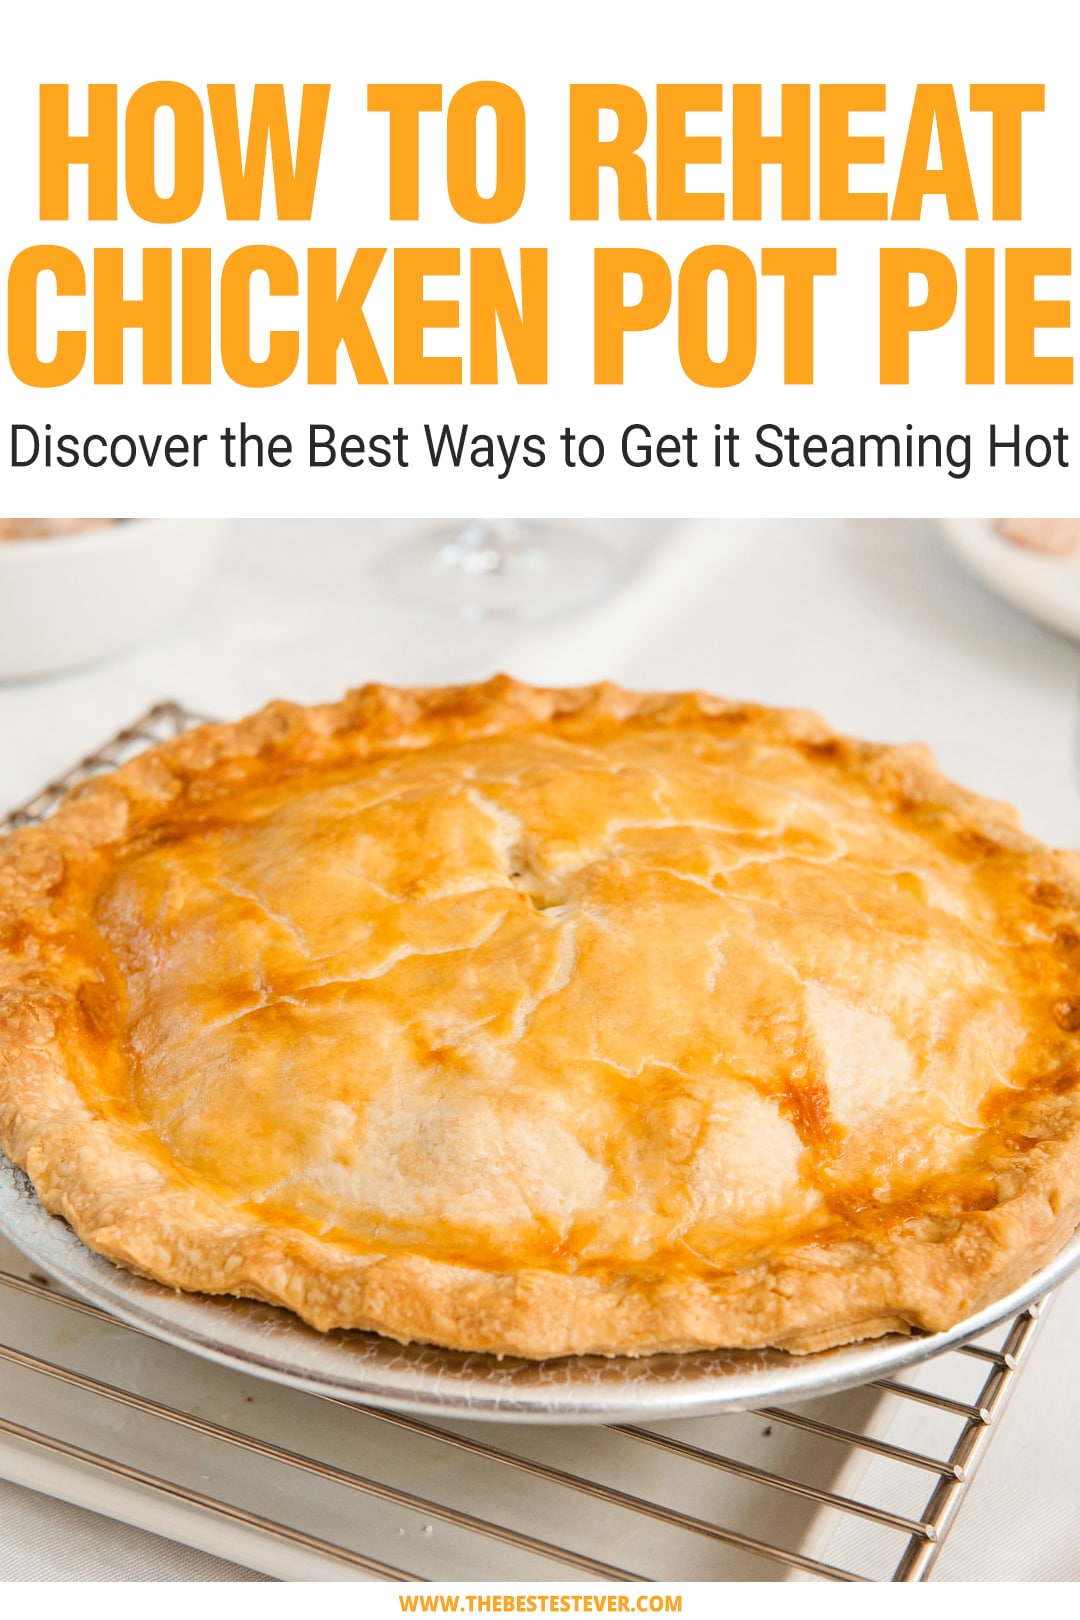 How to Reheat Chicken Pot Pie: A Look at the Best Options